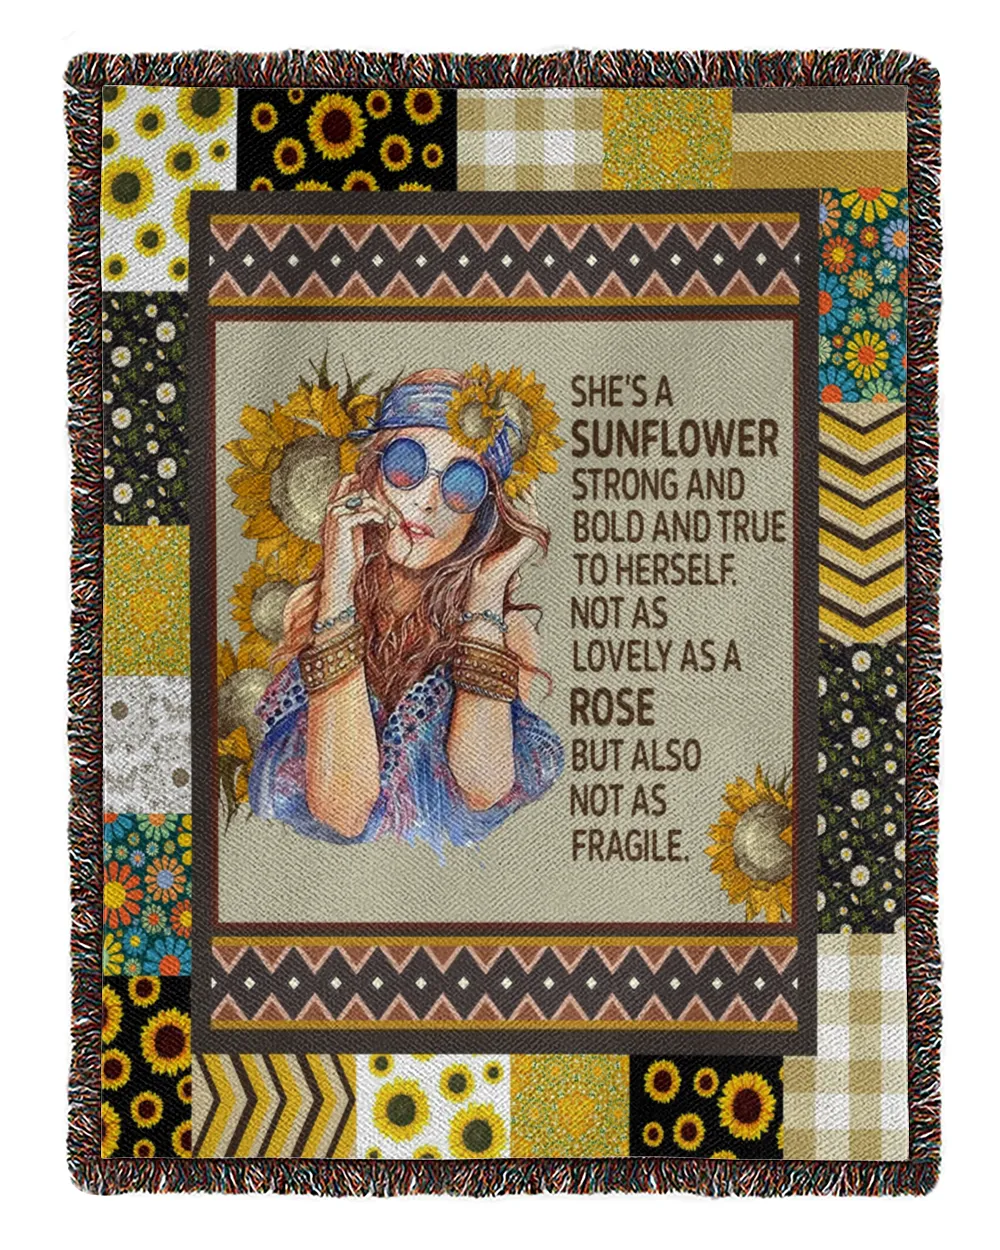 Sunflower Fleece Blanket, She's A Sunflower Strong And Bold And True To Herself